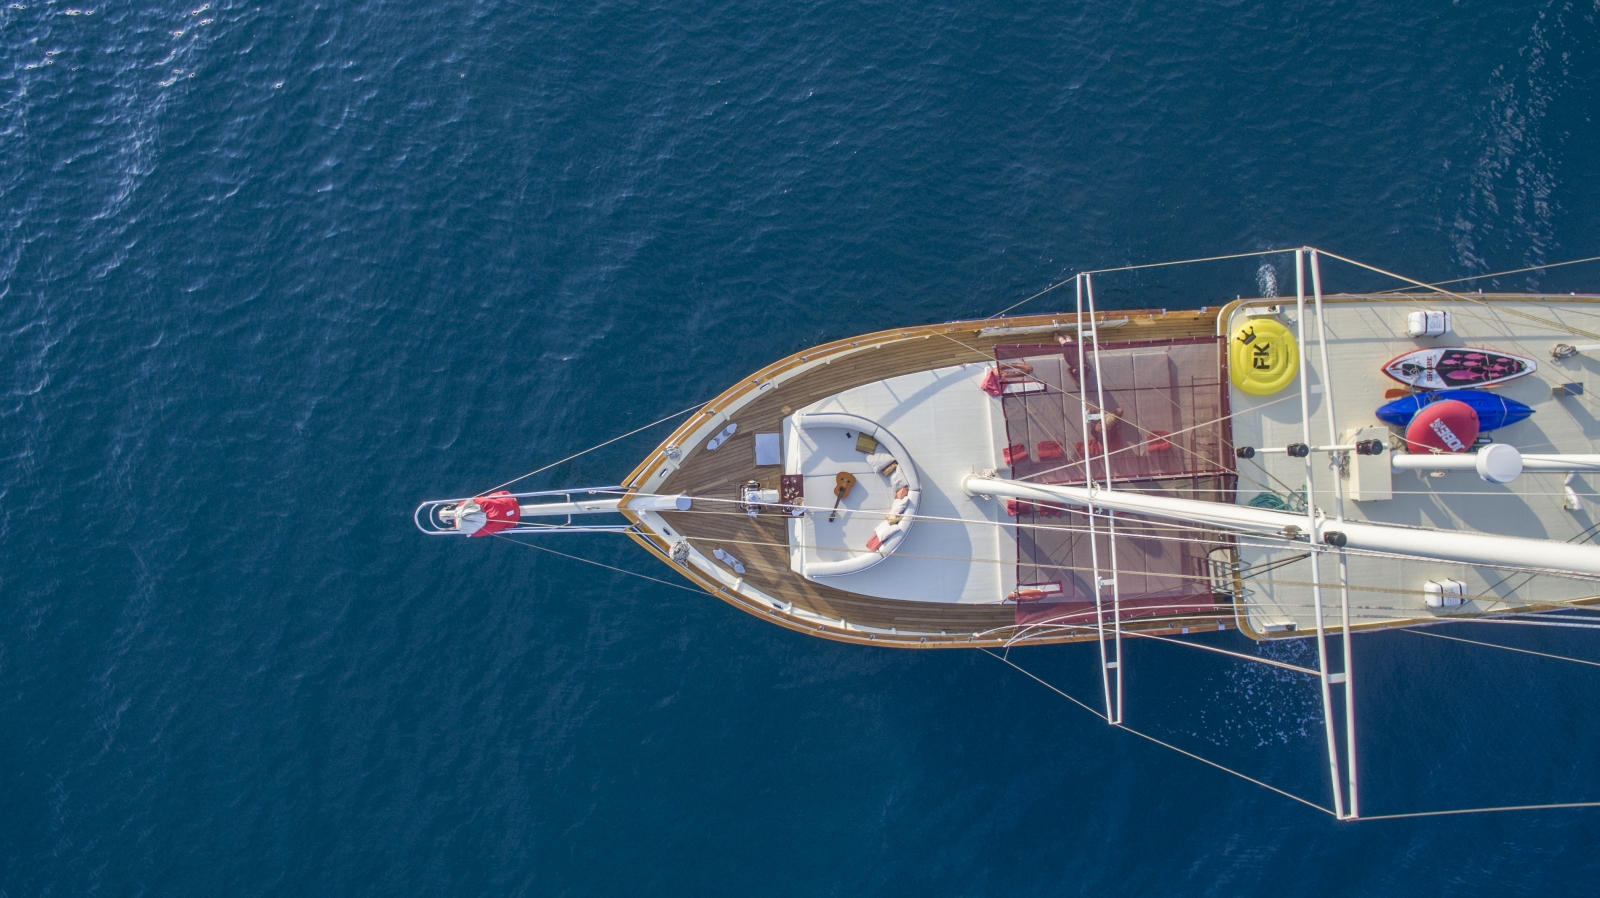 View from above the bow of Altair in Croatia